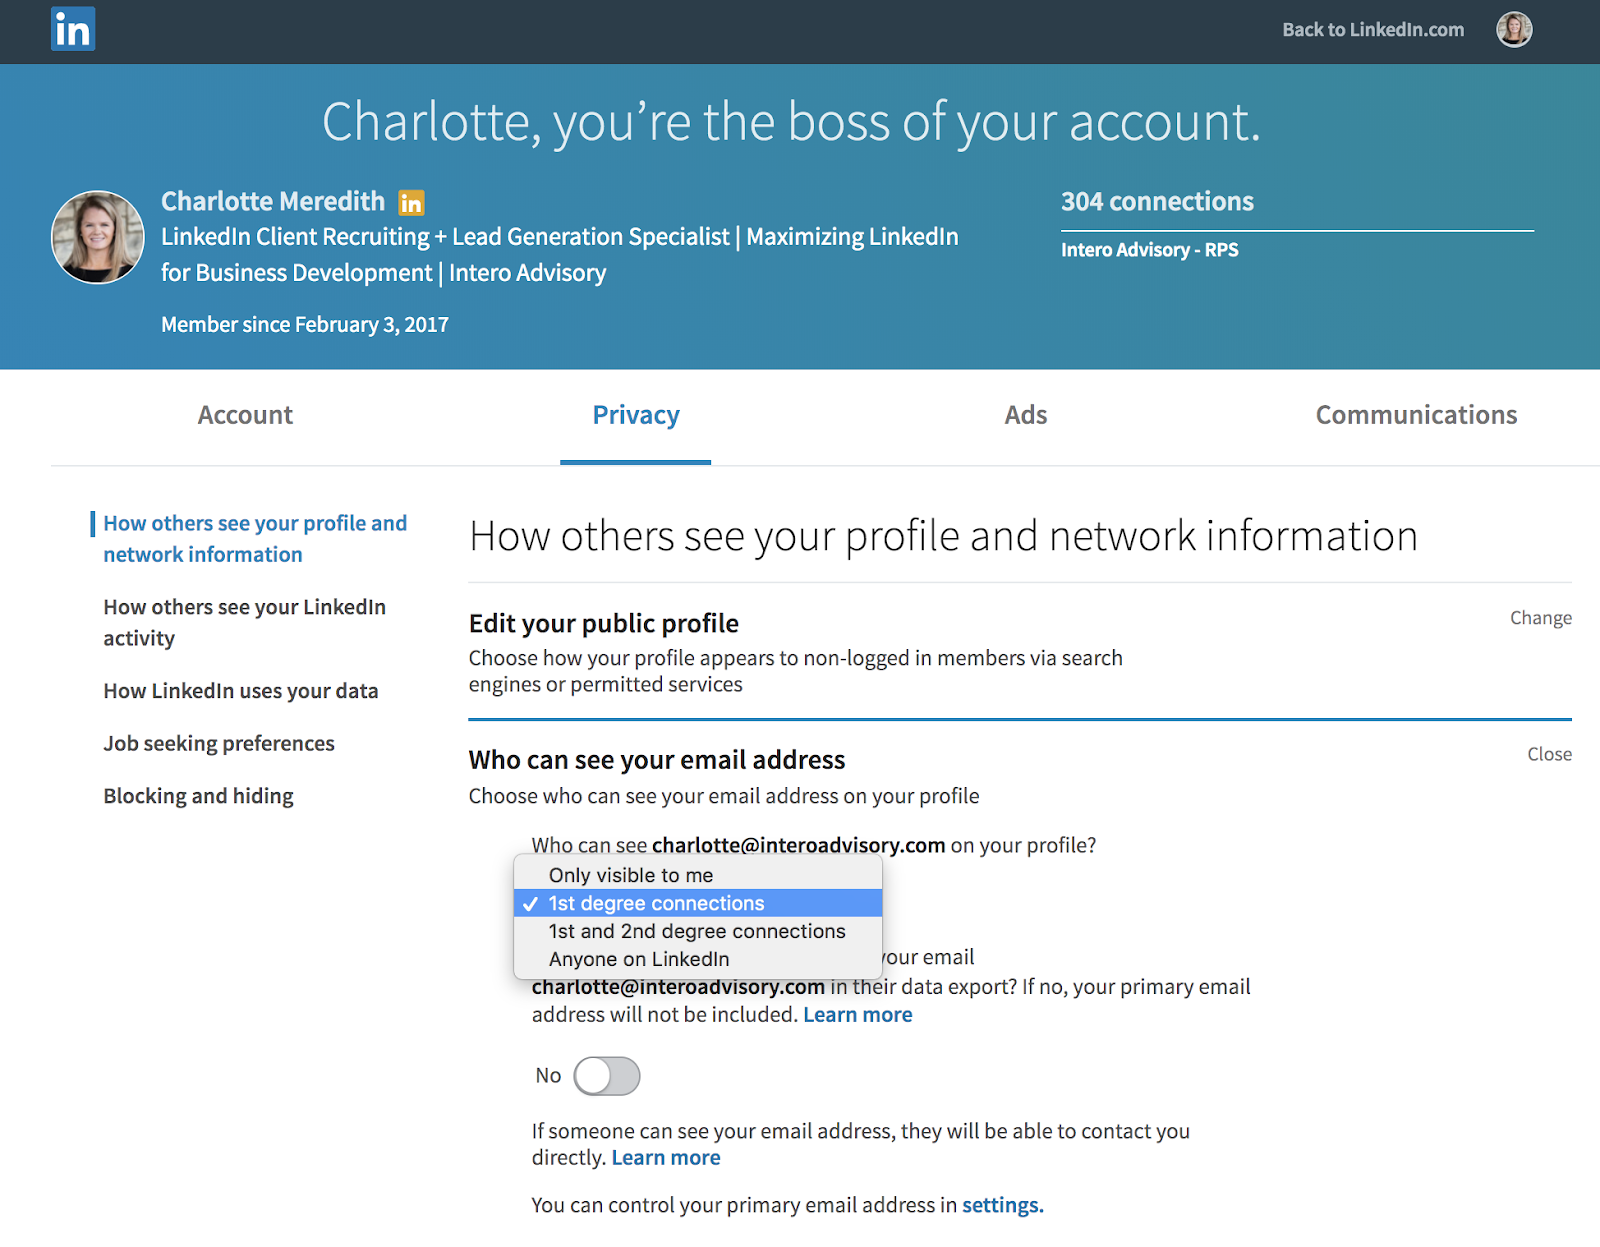 Are You Aware of What Contact Information is Posted on Your Profile?